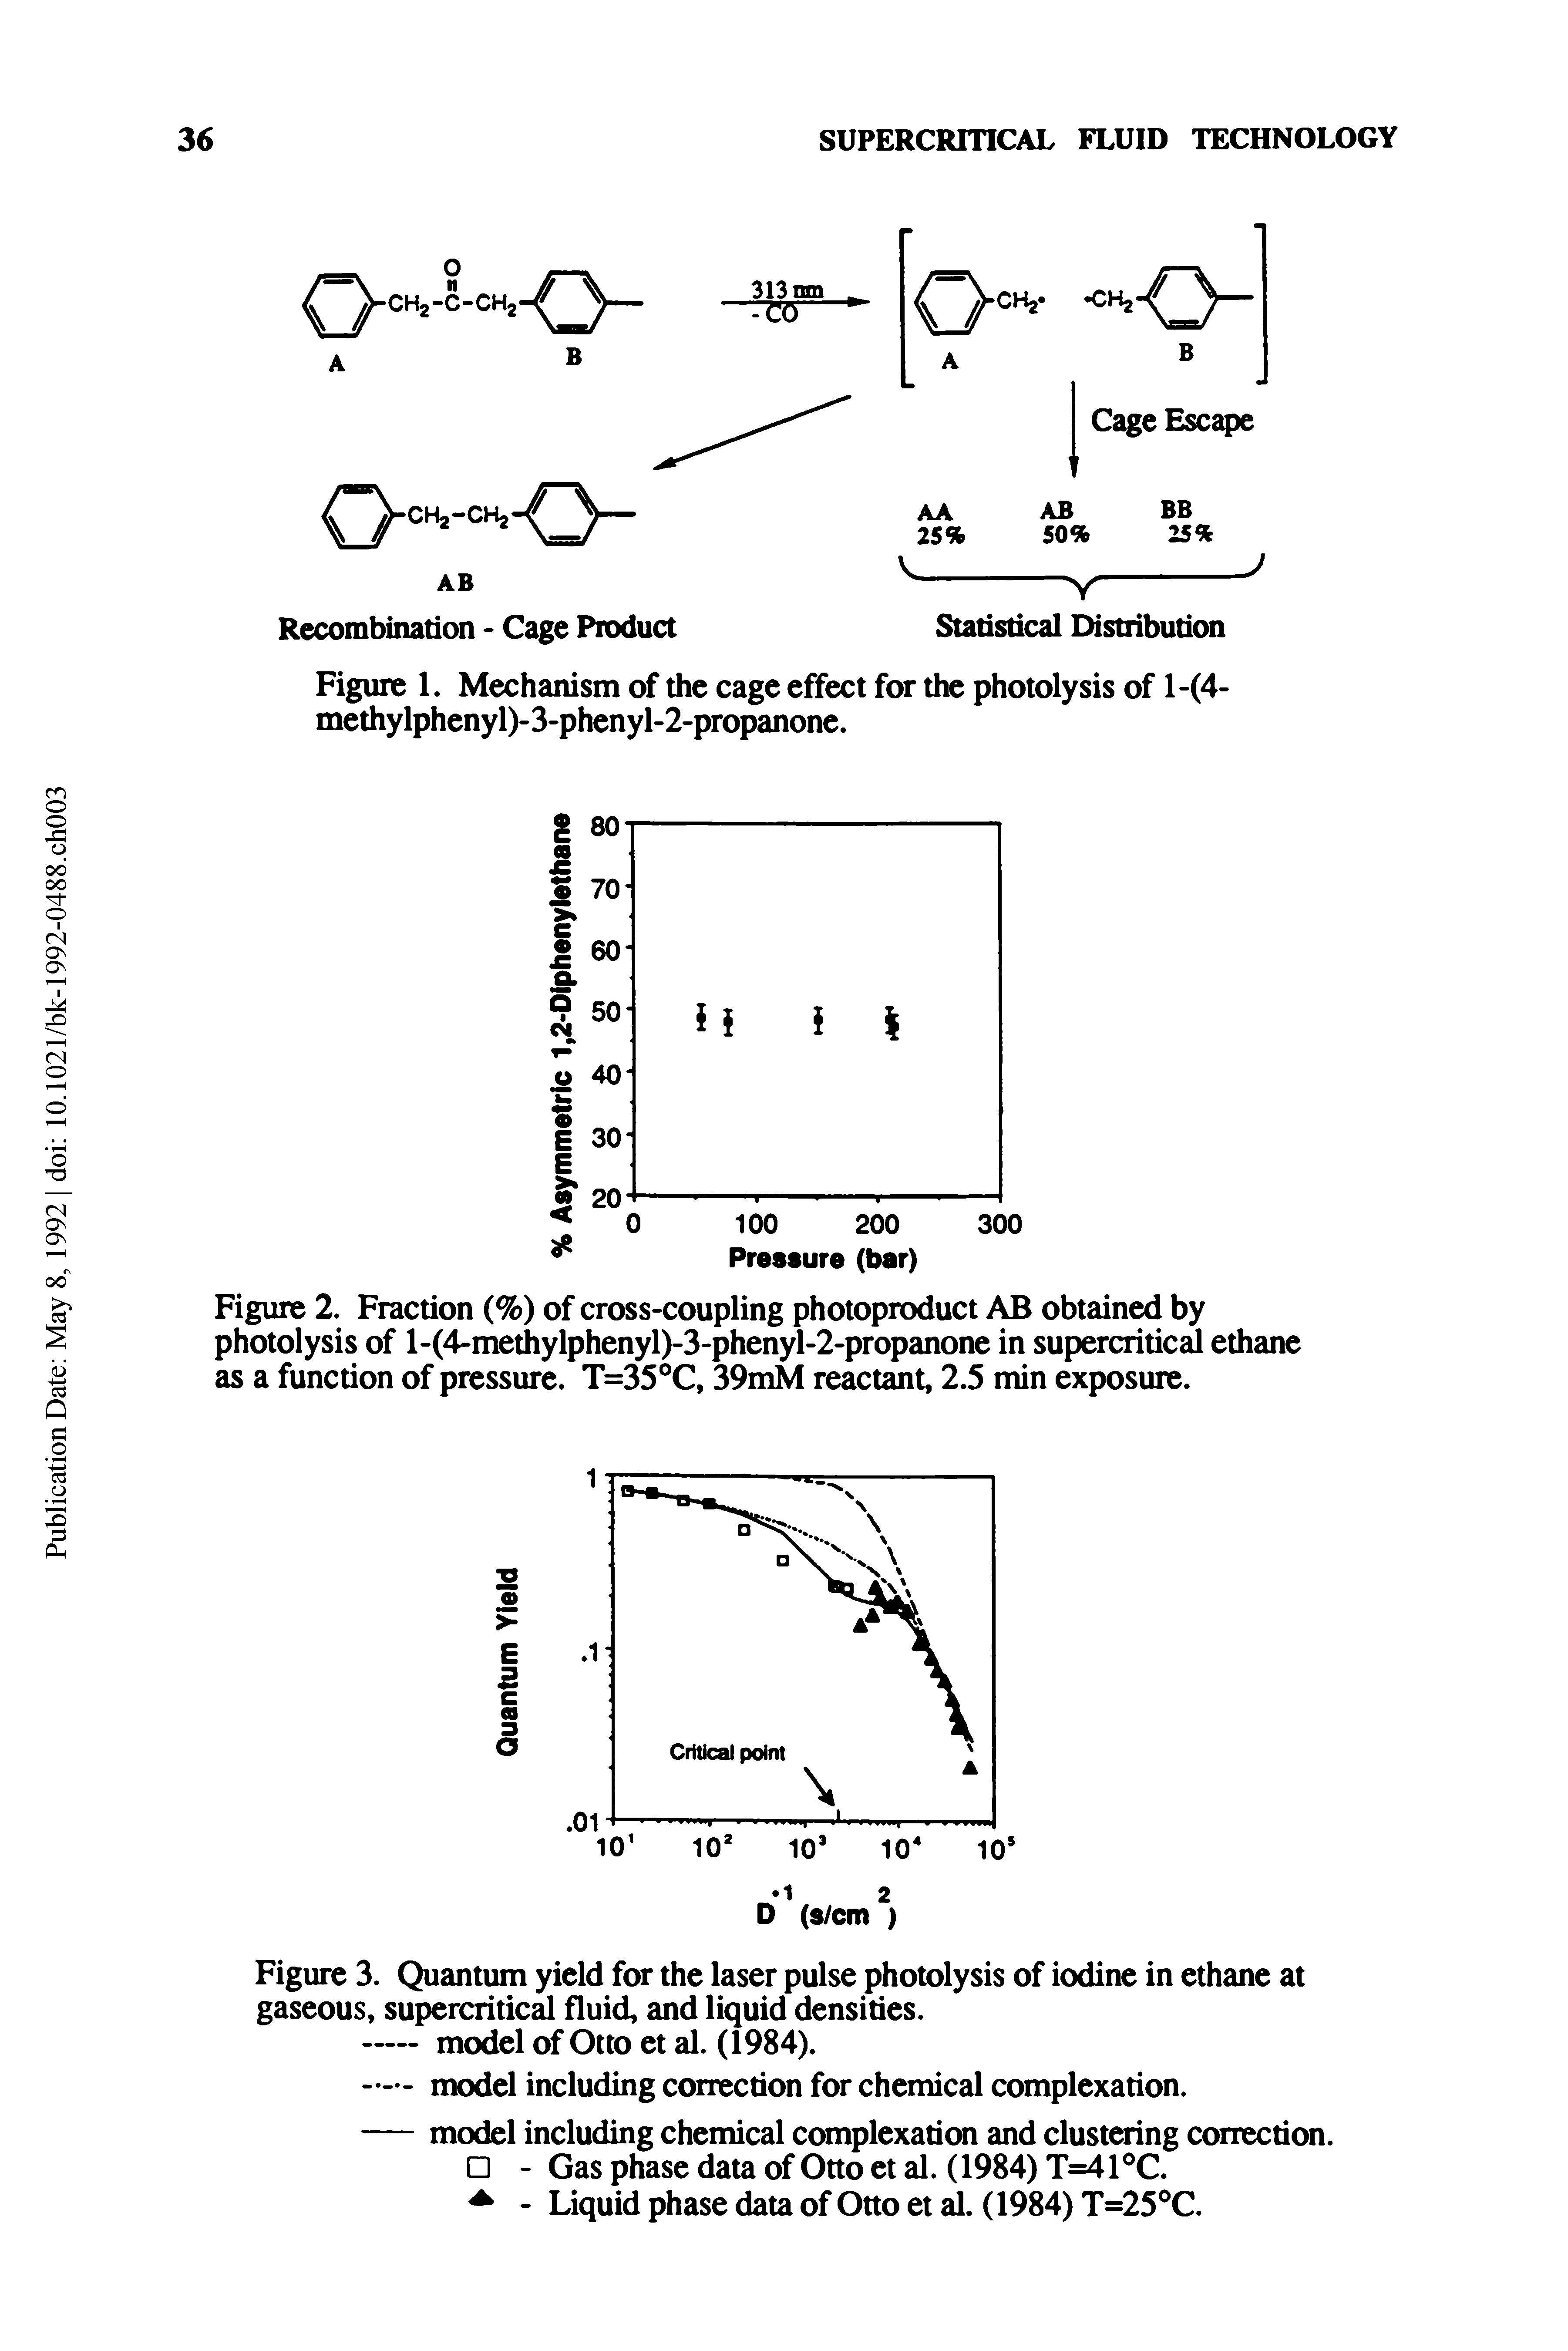 Figure 3. Quantum yield for the laser pulse photolysis of iodine in ethane at gaseous, supercritical fluid, and liquid densities.